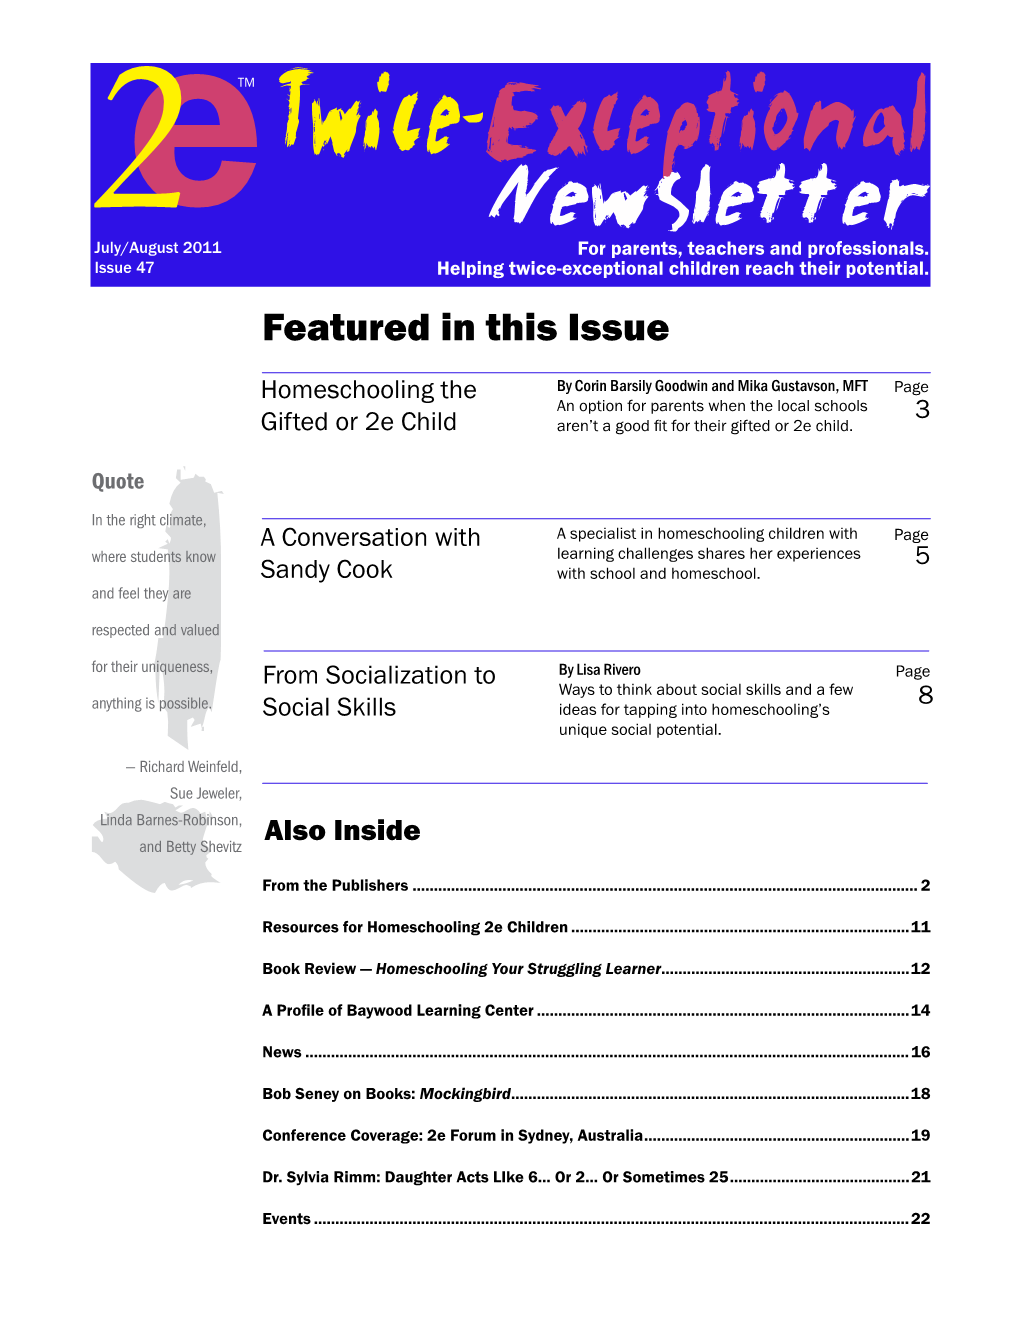 Twice-Exceptional Newsletter 2July/August 2011 for Parents, Teachers and Professionals